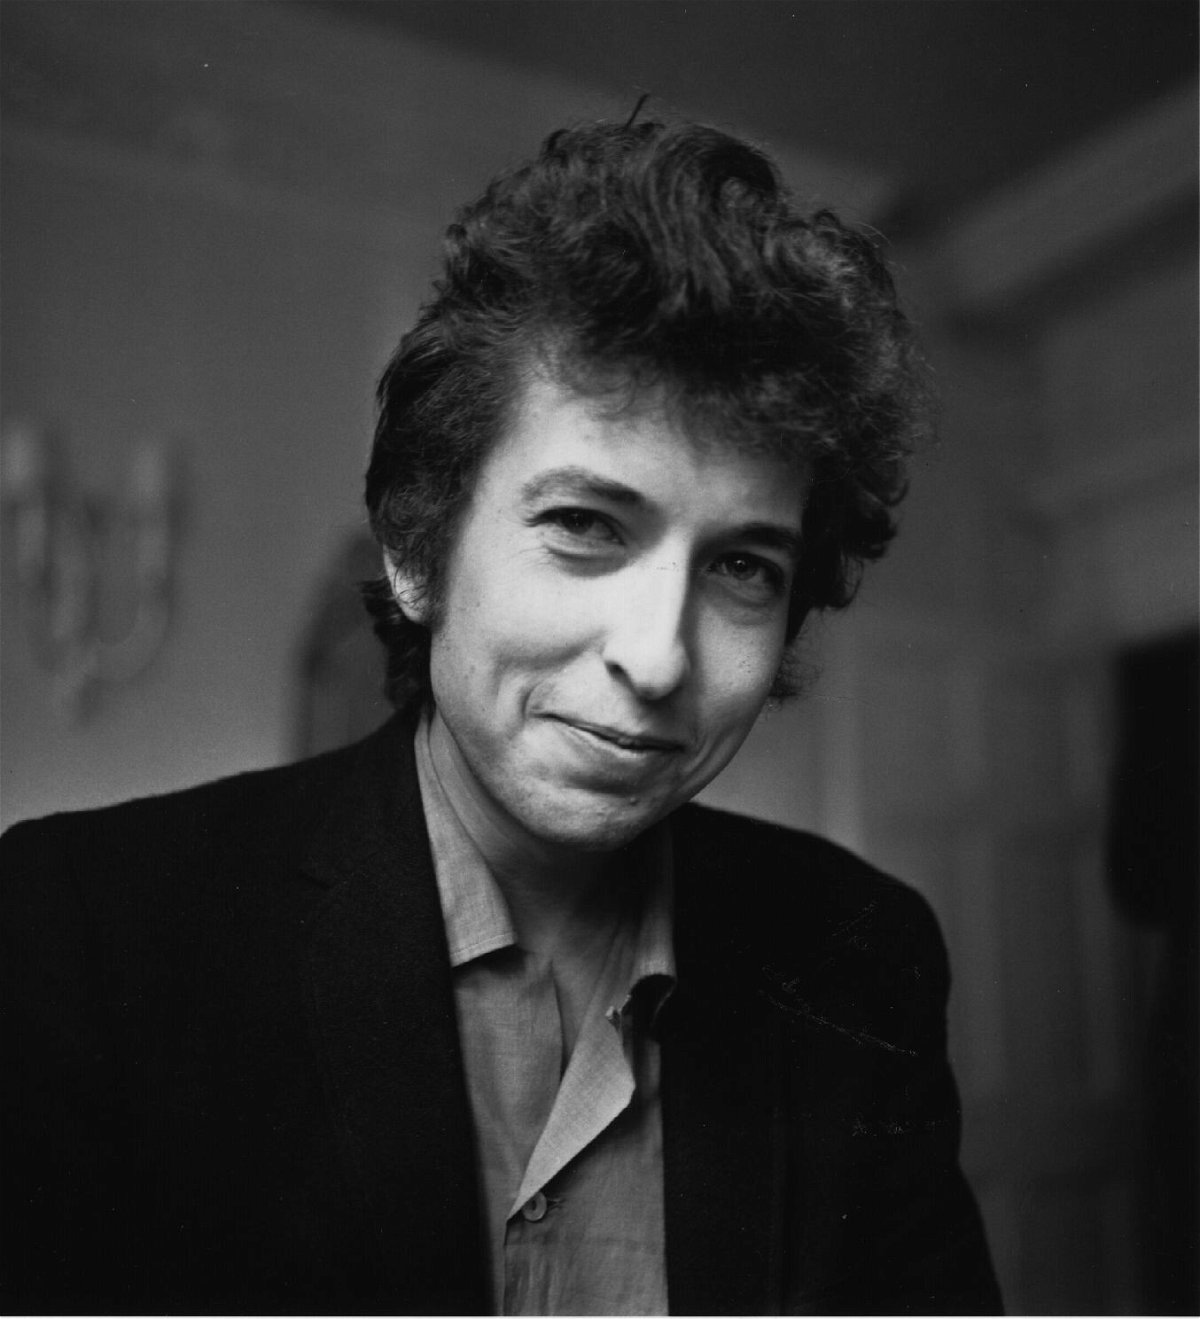 <i>Harry Thompson/Hulton Archive/Getty Images</i><br/>American folk/rock singer and songwriter Bob Dylan smiles during a meeting with the British press